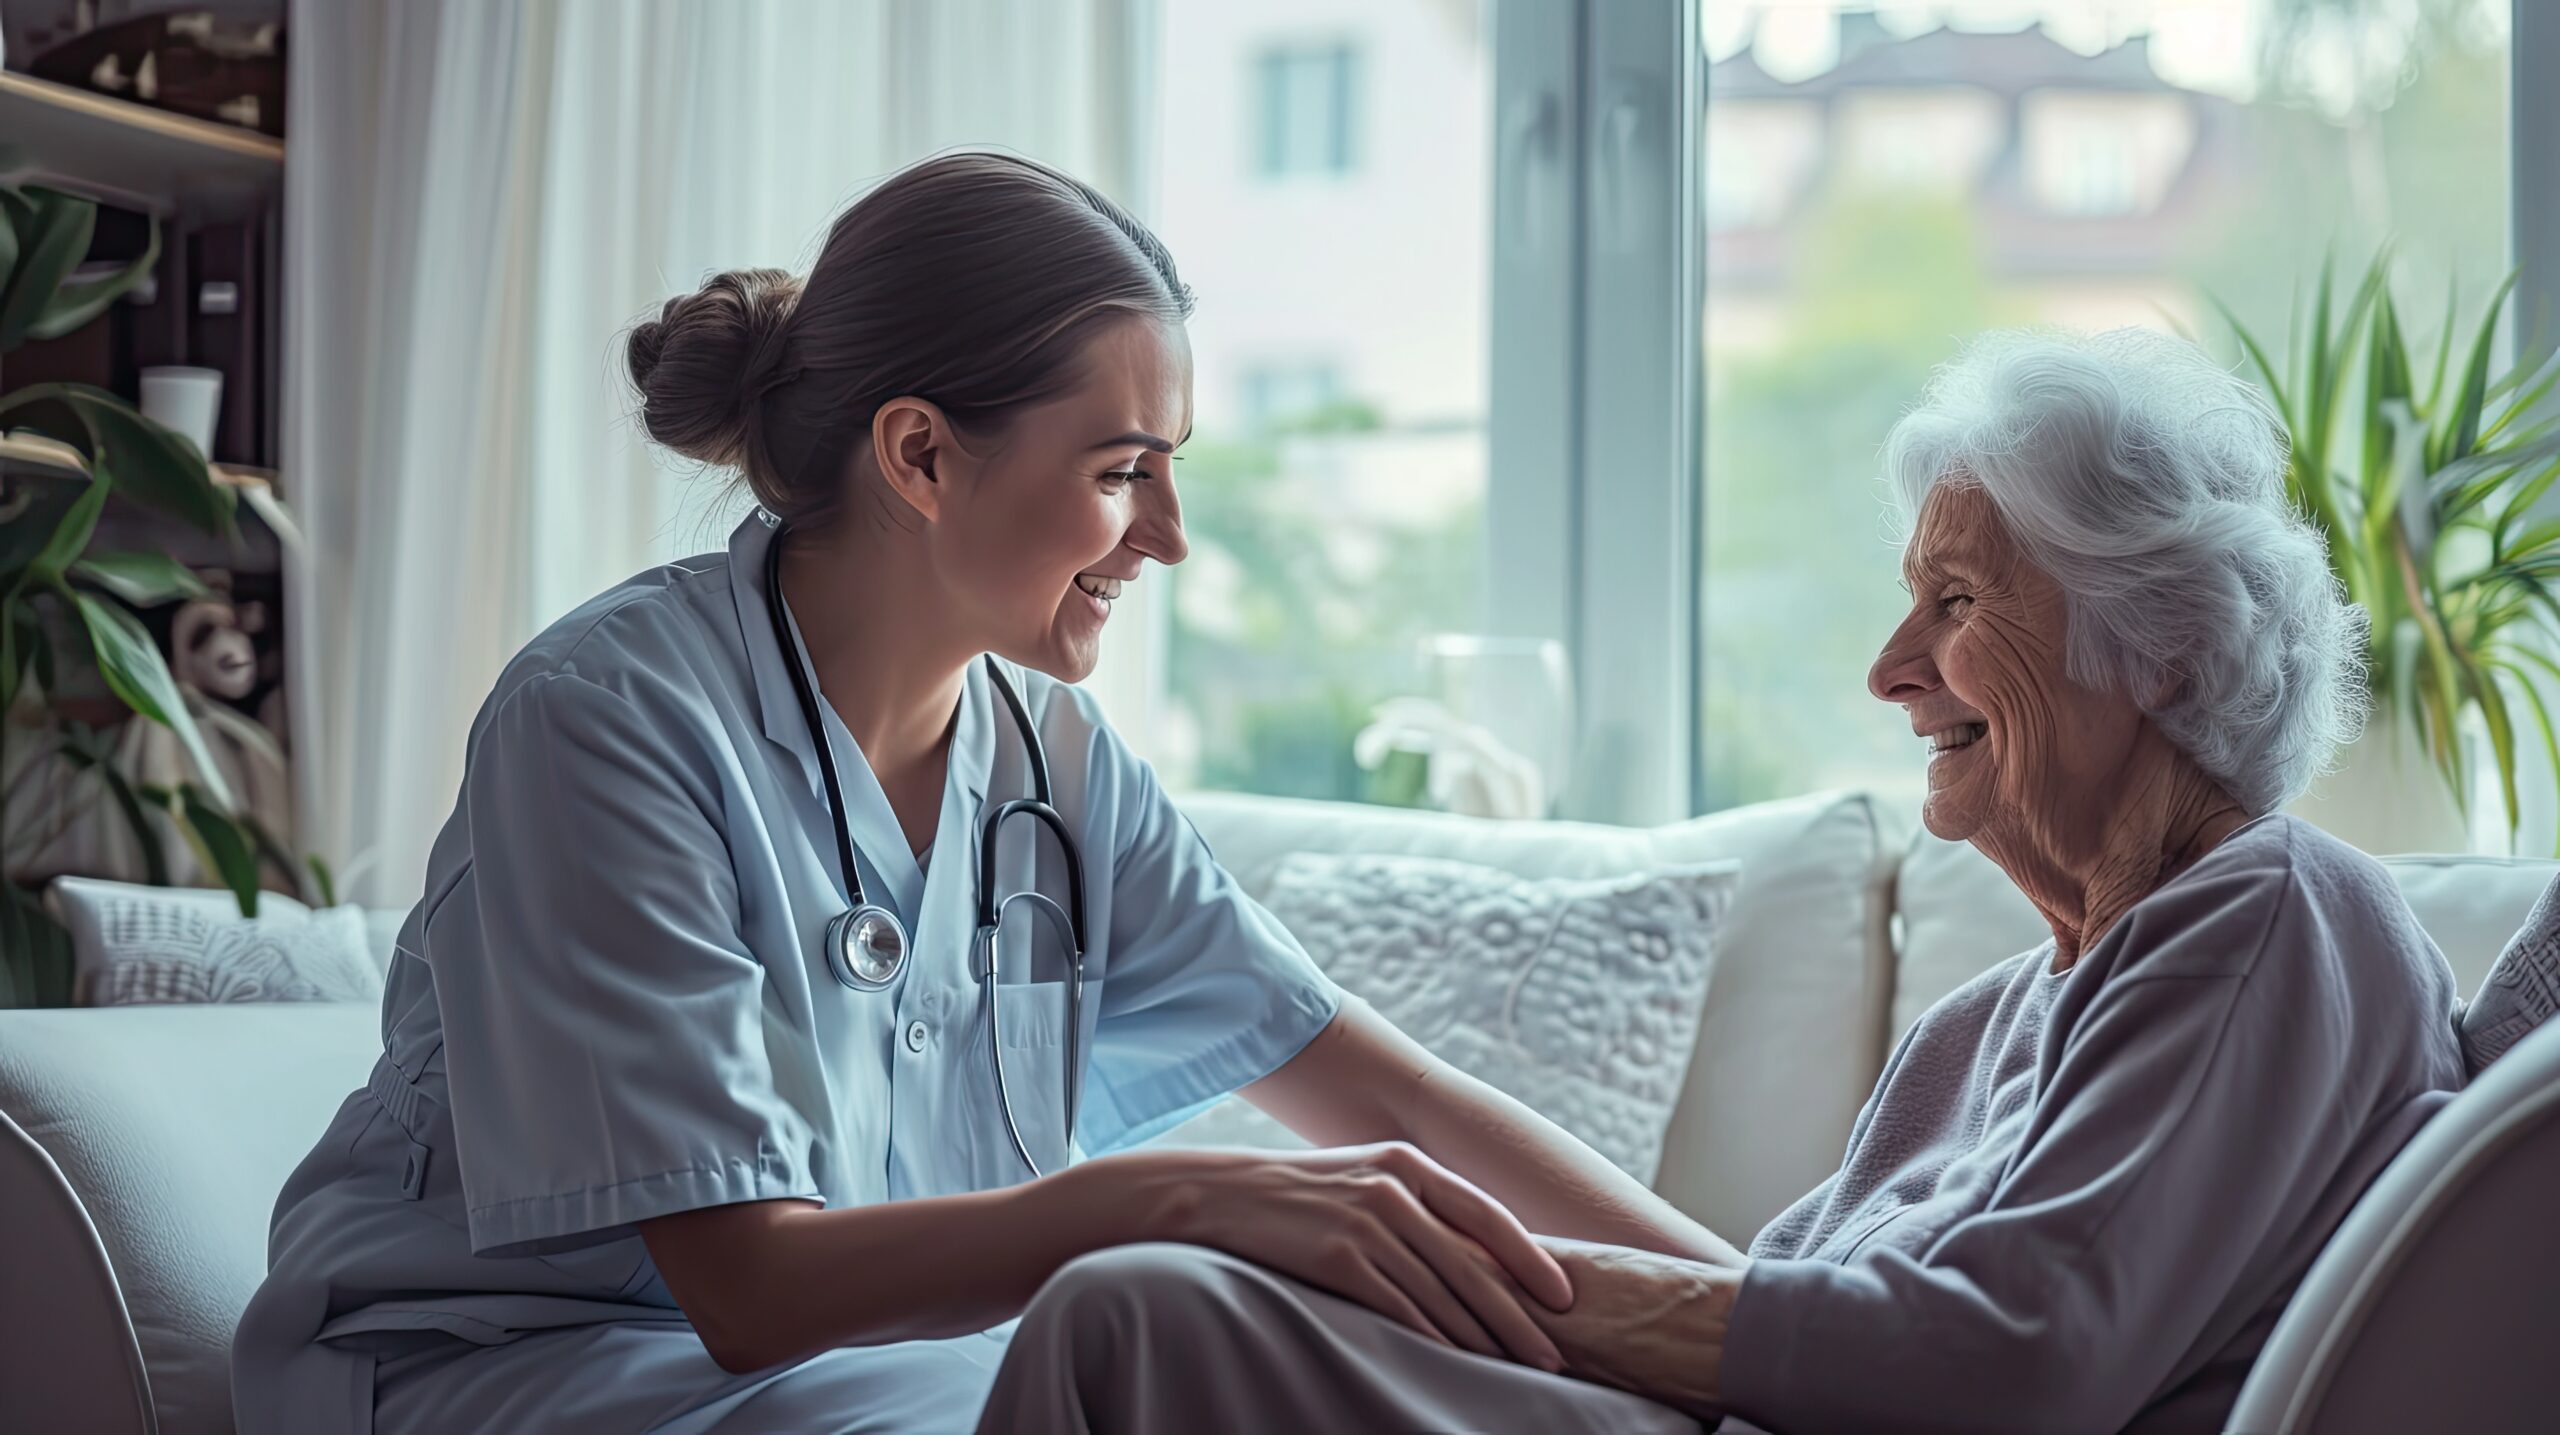 A gentle nurse caring for a happy elderly woman, sharing a moment of genuine connection and joy.